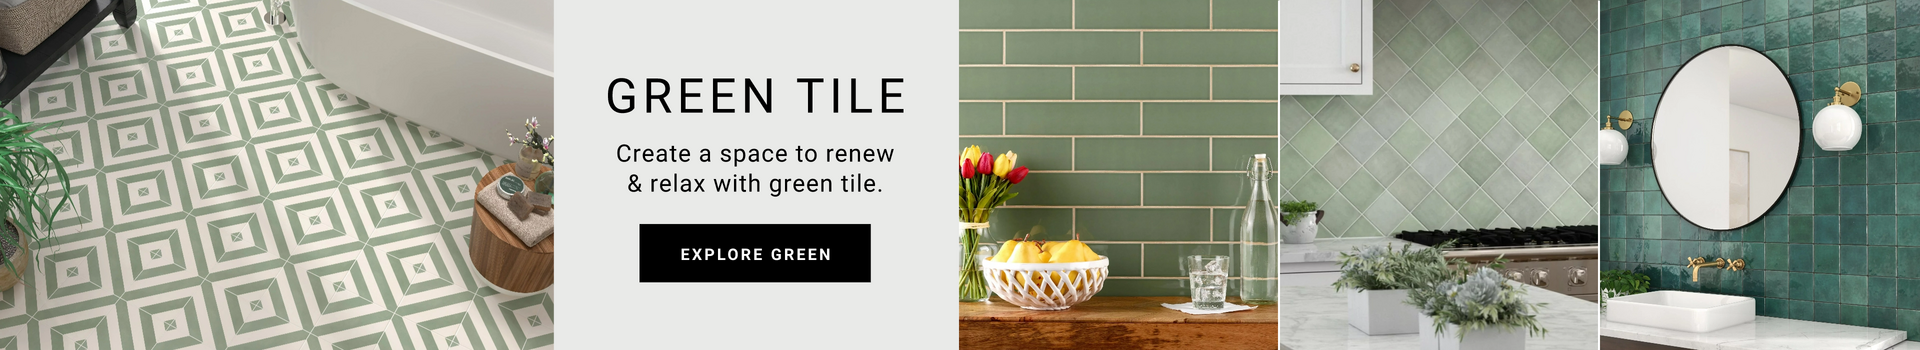 Create a space to renew & relax with green tile.